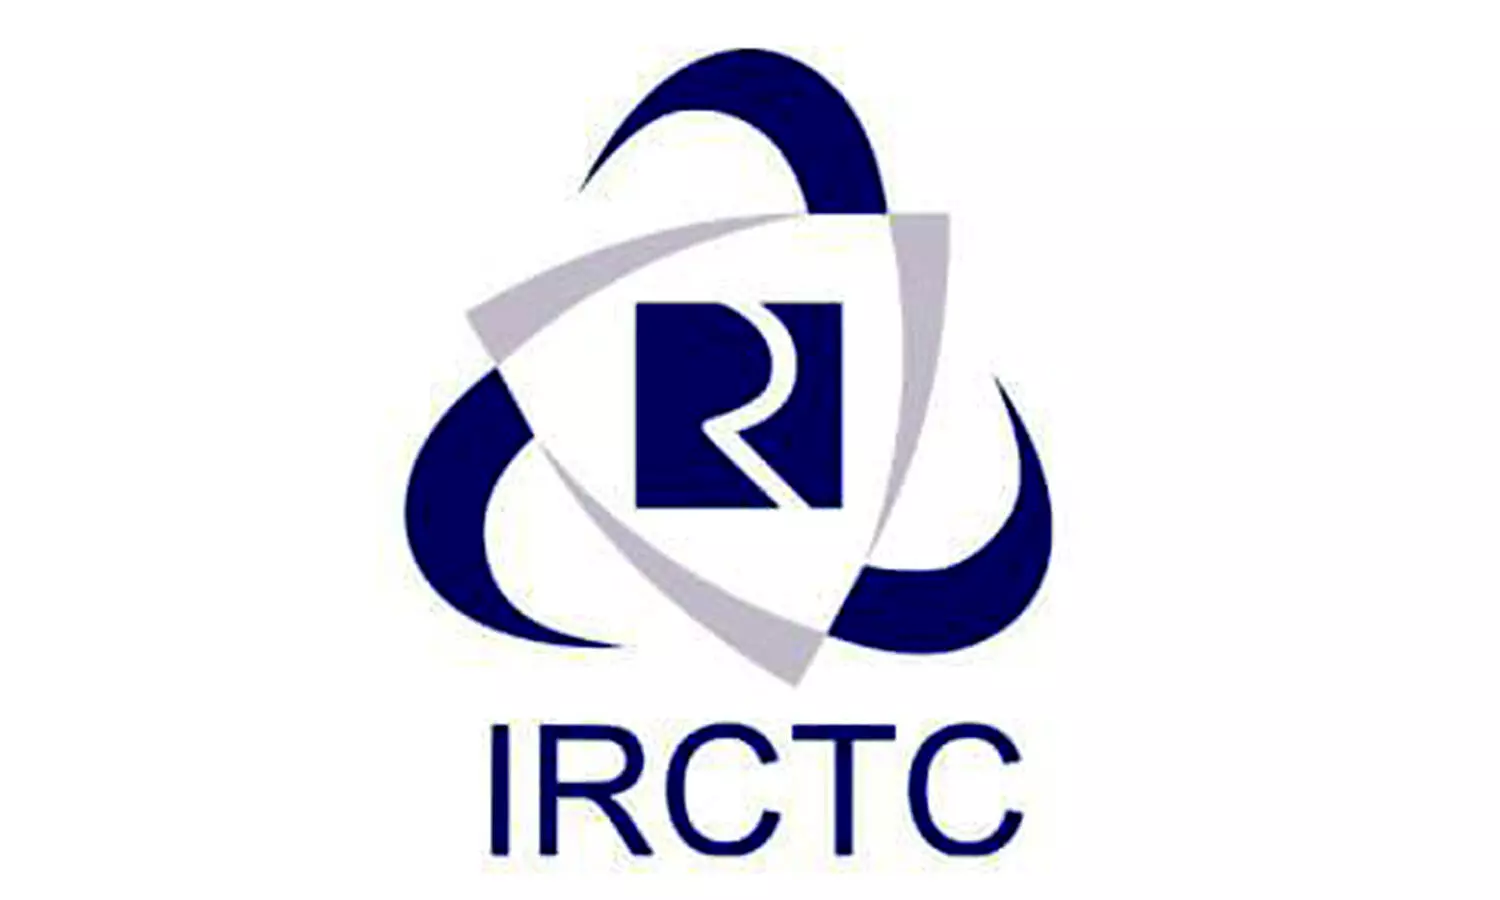 IRCTC ordered to pay Rs. 15,000 to Hyderabad passenger for last-minute cancellations